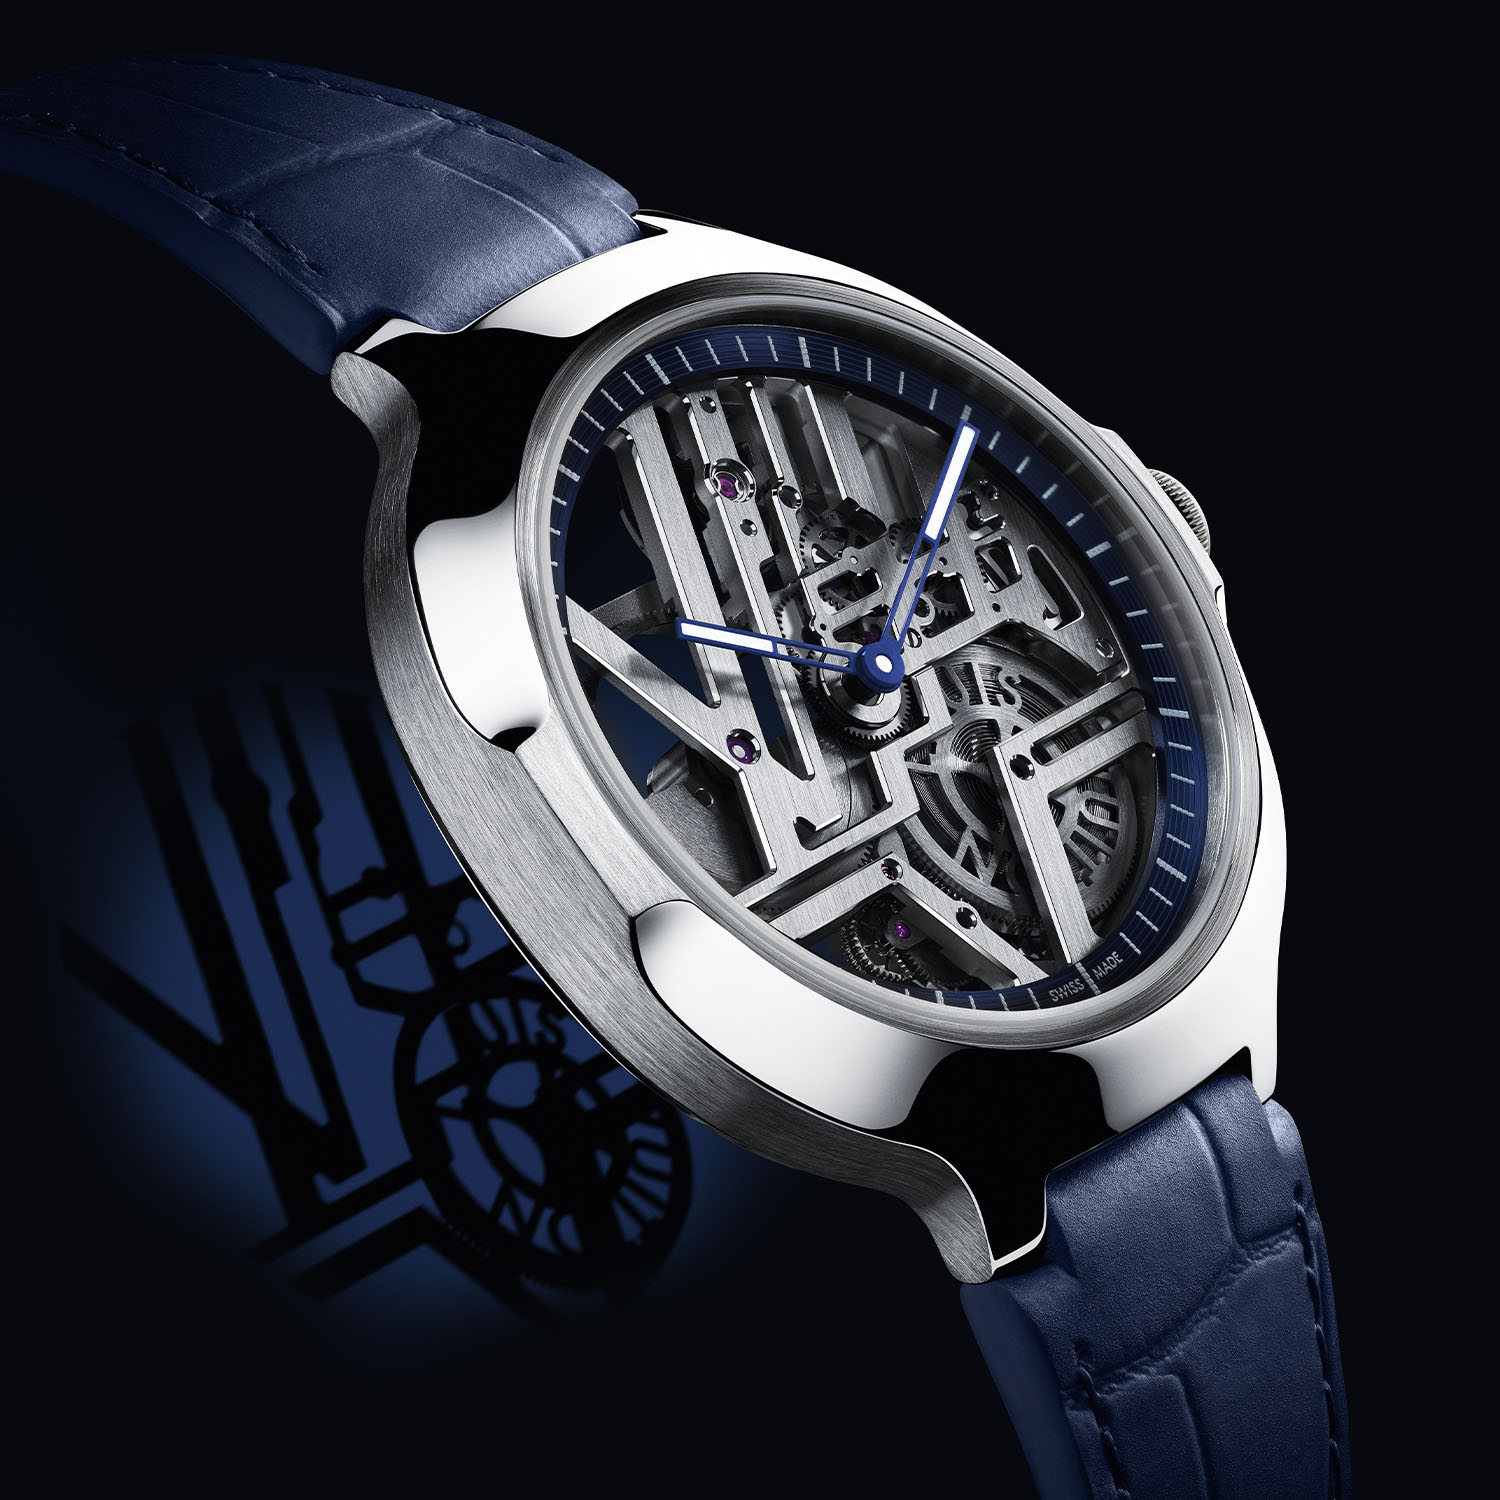 Louis Vuitton Voyager Minute Repeater Flying Tourbillon